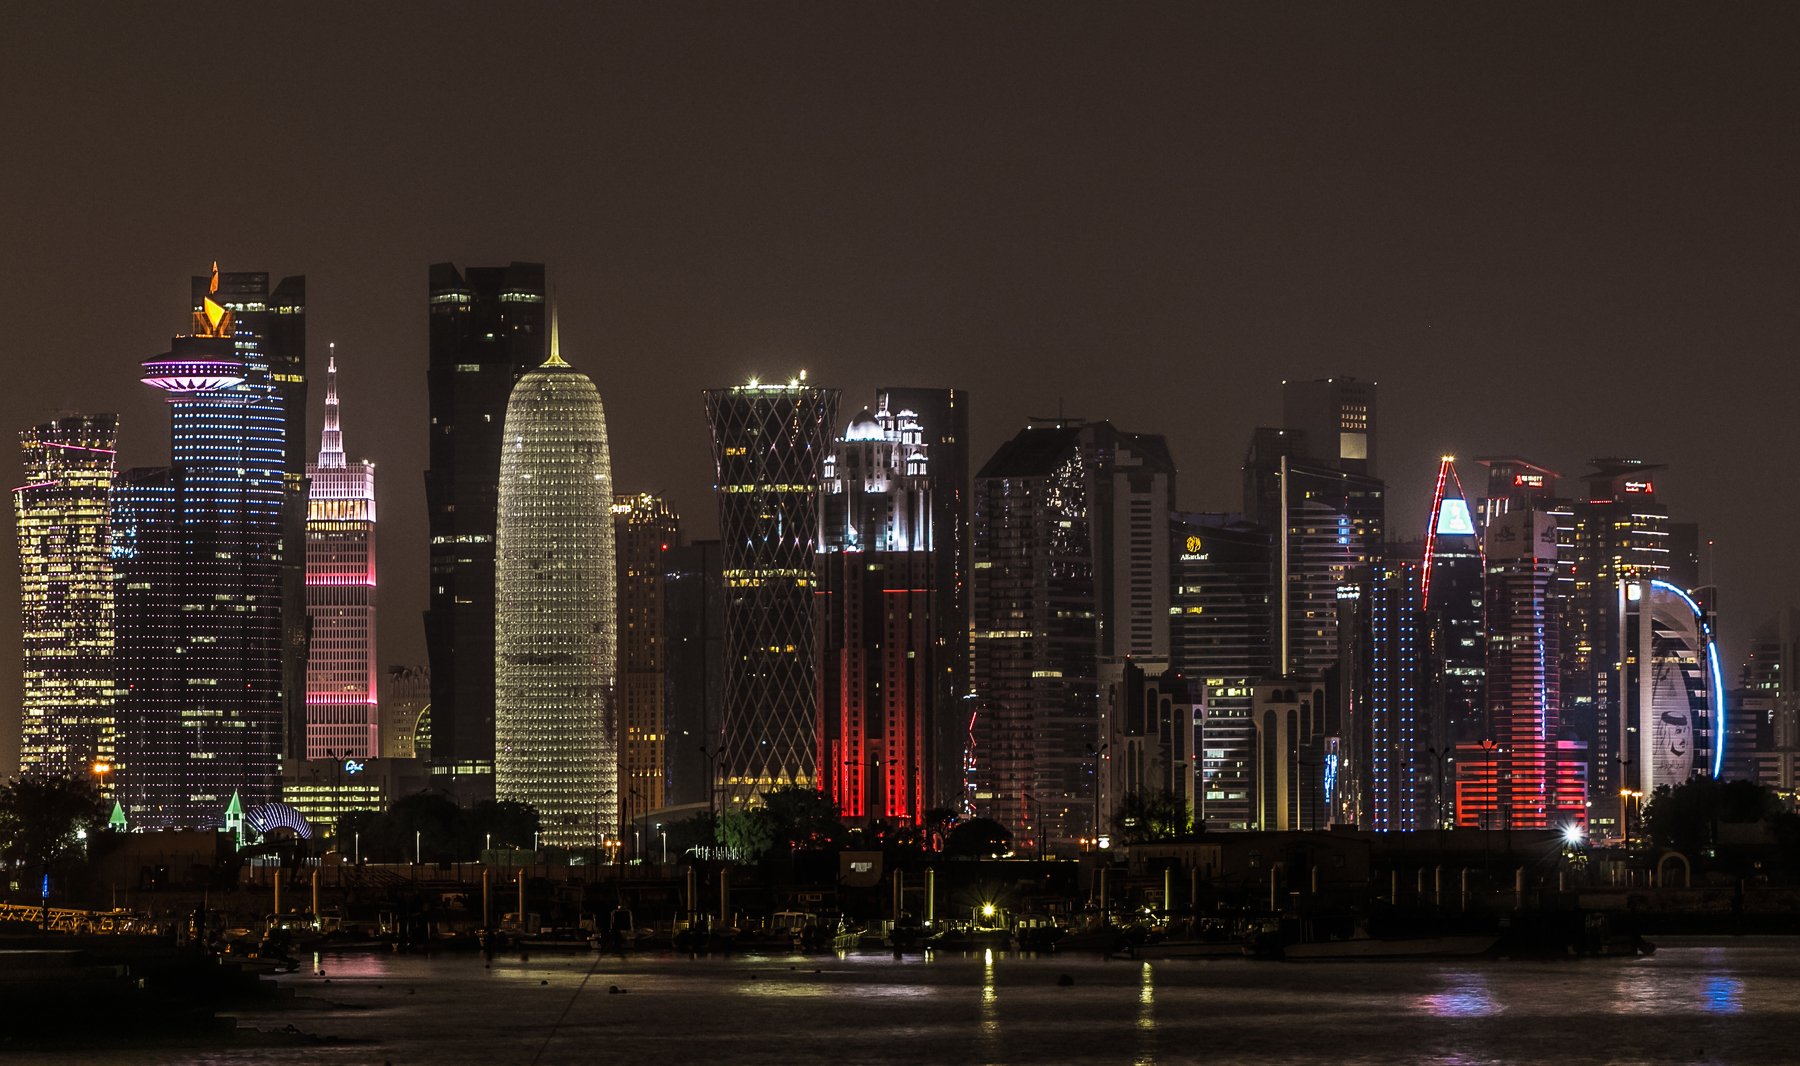  #doha #qatar #nationalday #downtown #light #light_shot #night #seascape #clouds #midnight #d #500px #500pxphoto #35awards #city #home #shades #view #beautiful #landscape #me #happy #enjoy #life #iphone #pictures #december #beautiful #me #enjoy #life #iph, Moutaz Fino